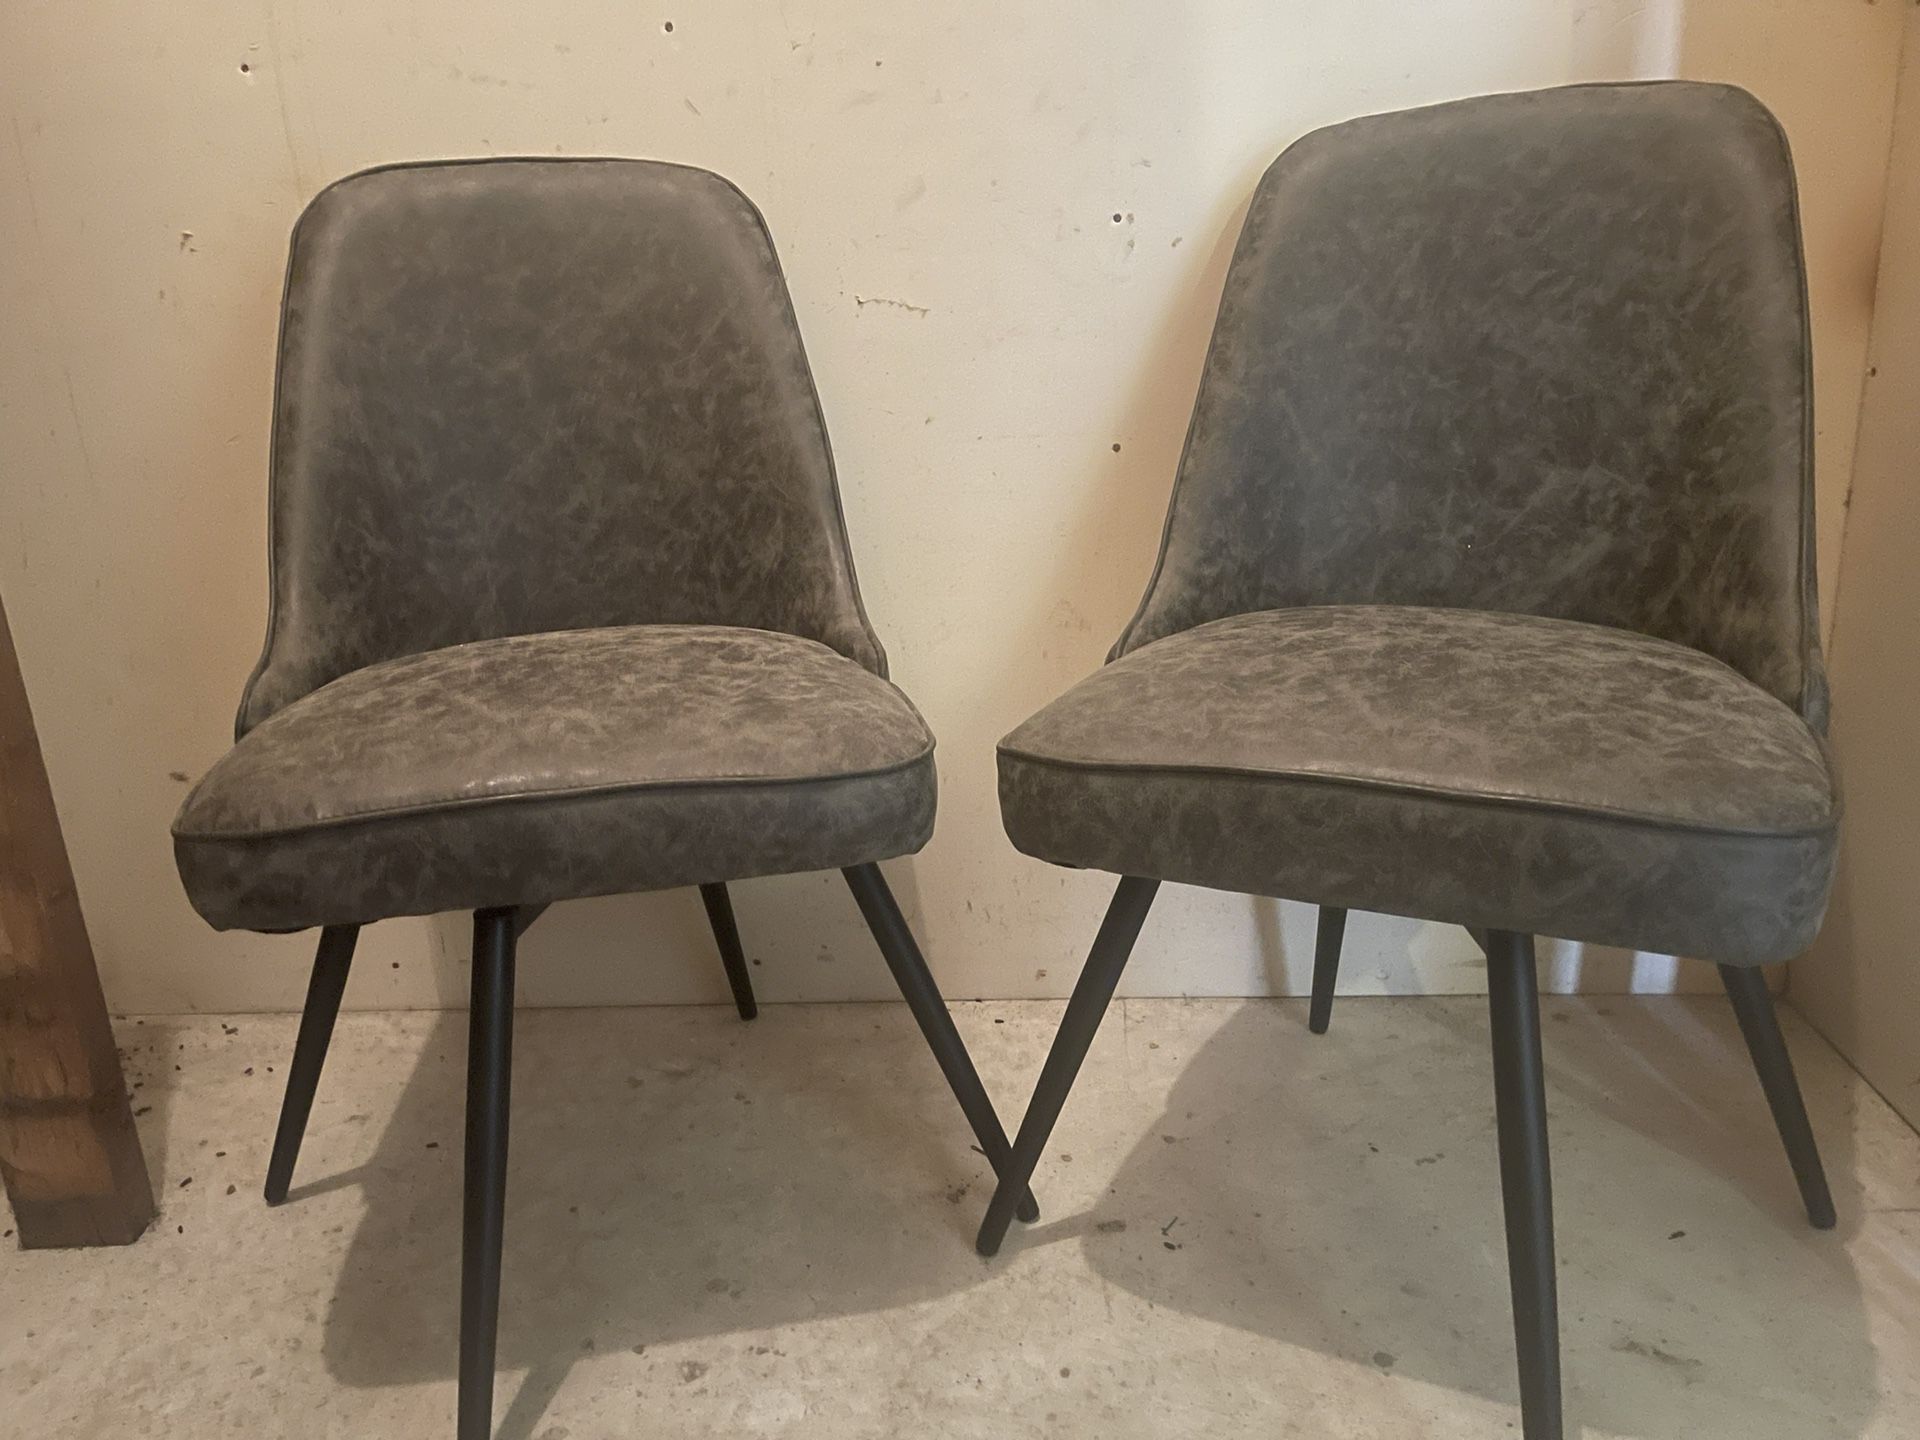 Two Gray Chairs